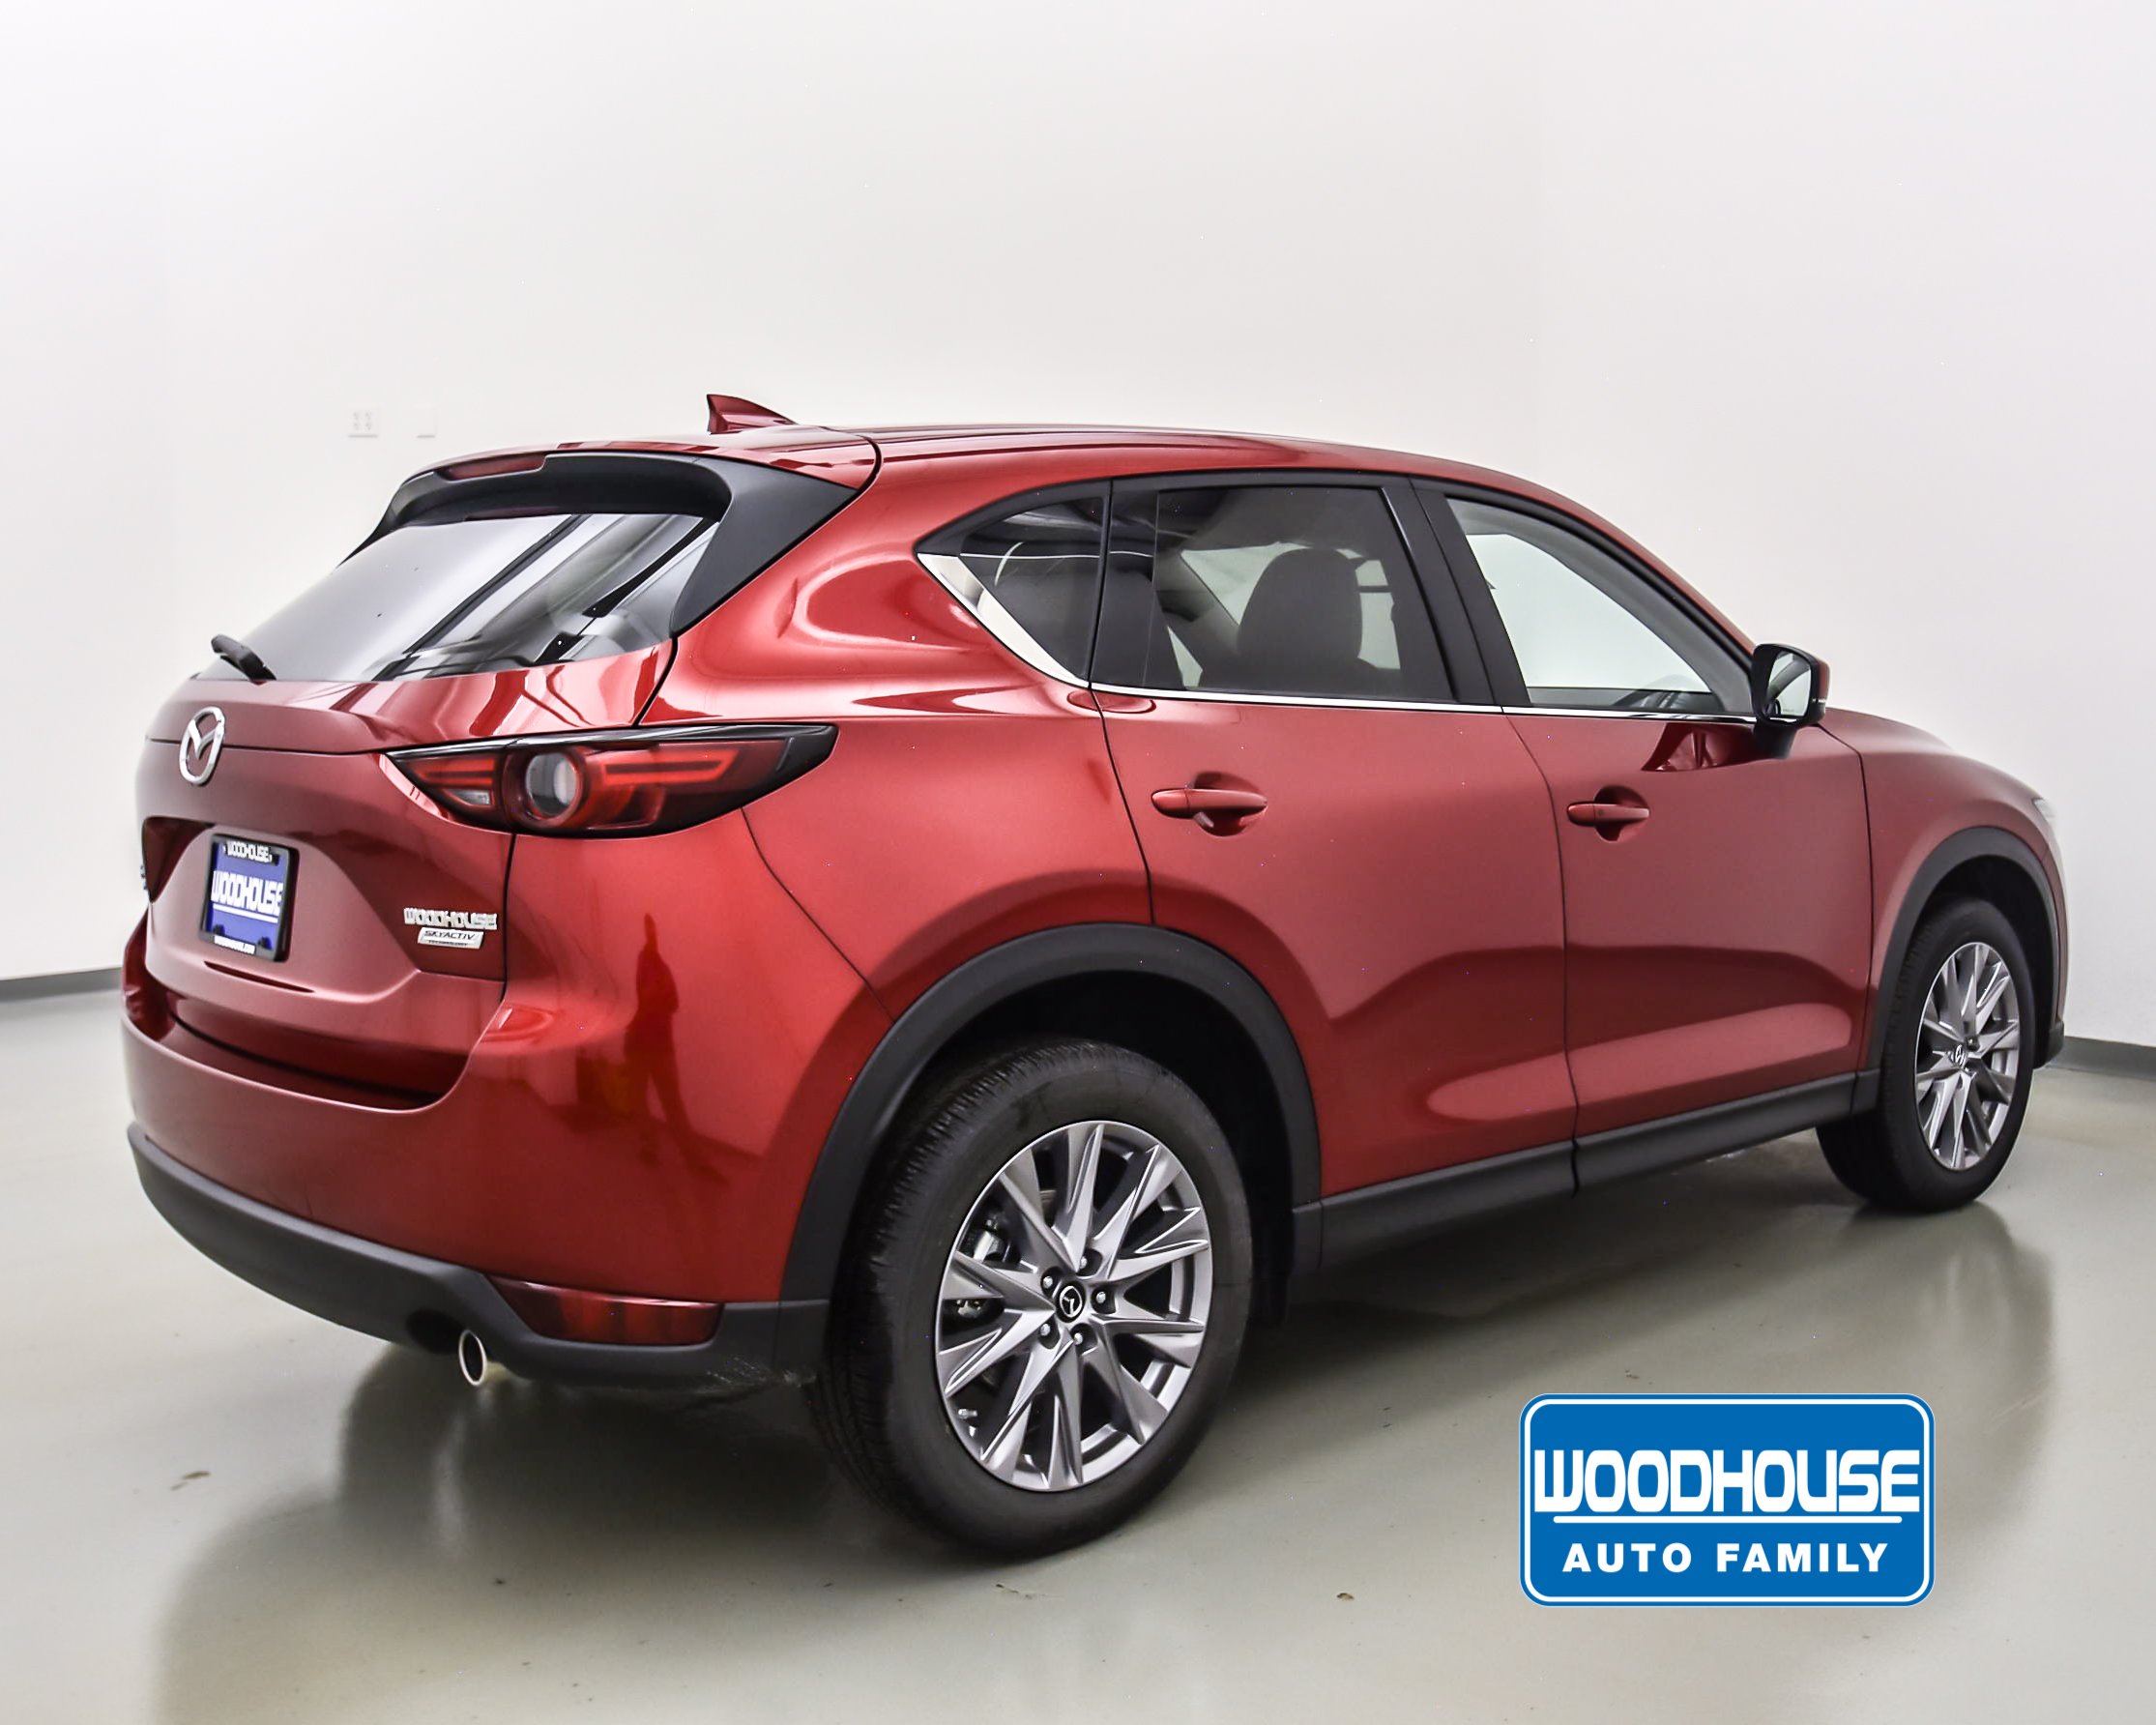 New 2019 Mazda CX-5 Grand Touring Sport Utility in Omaha #X190048 ...